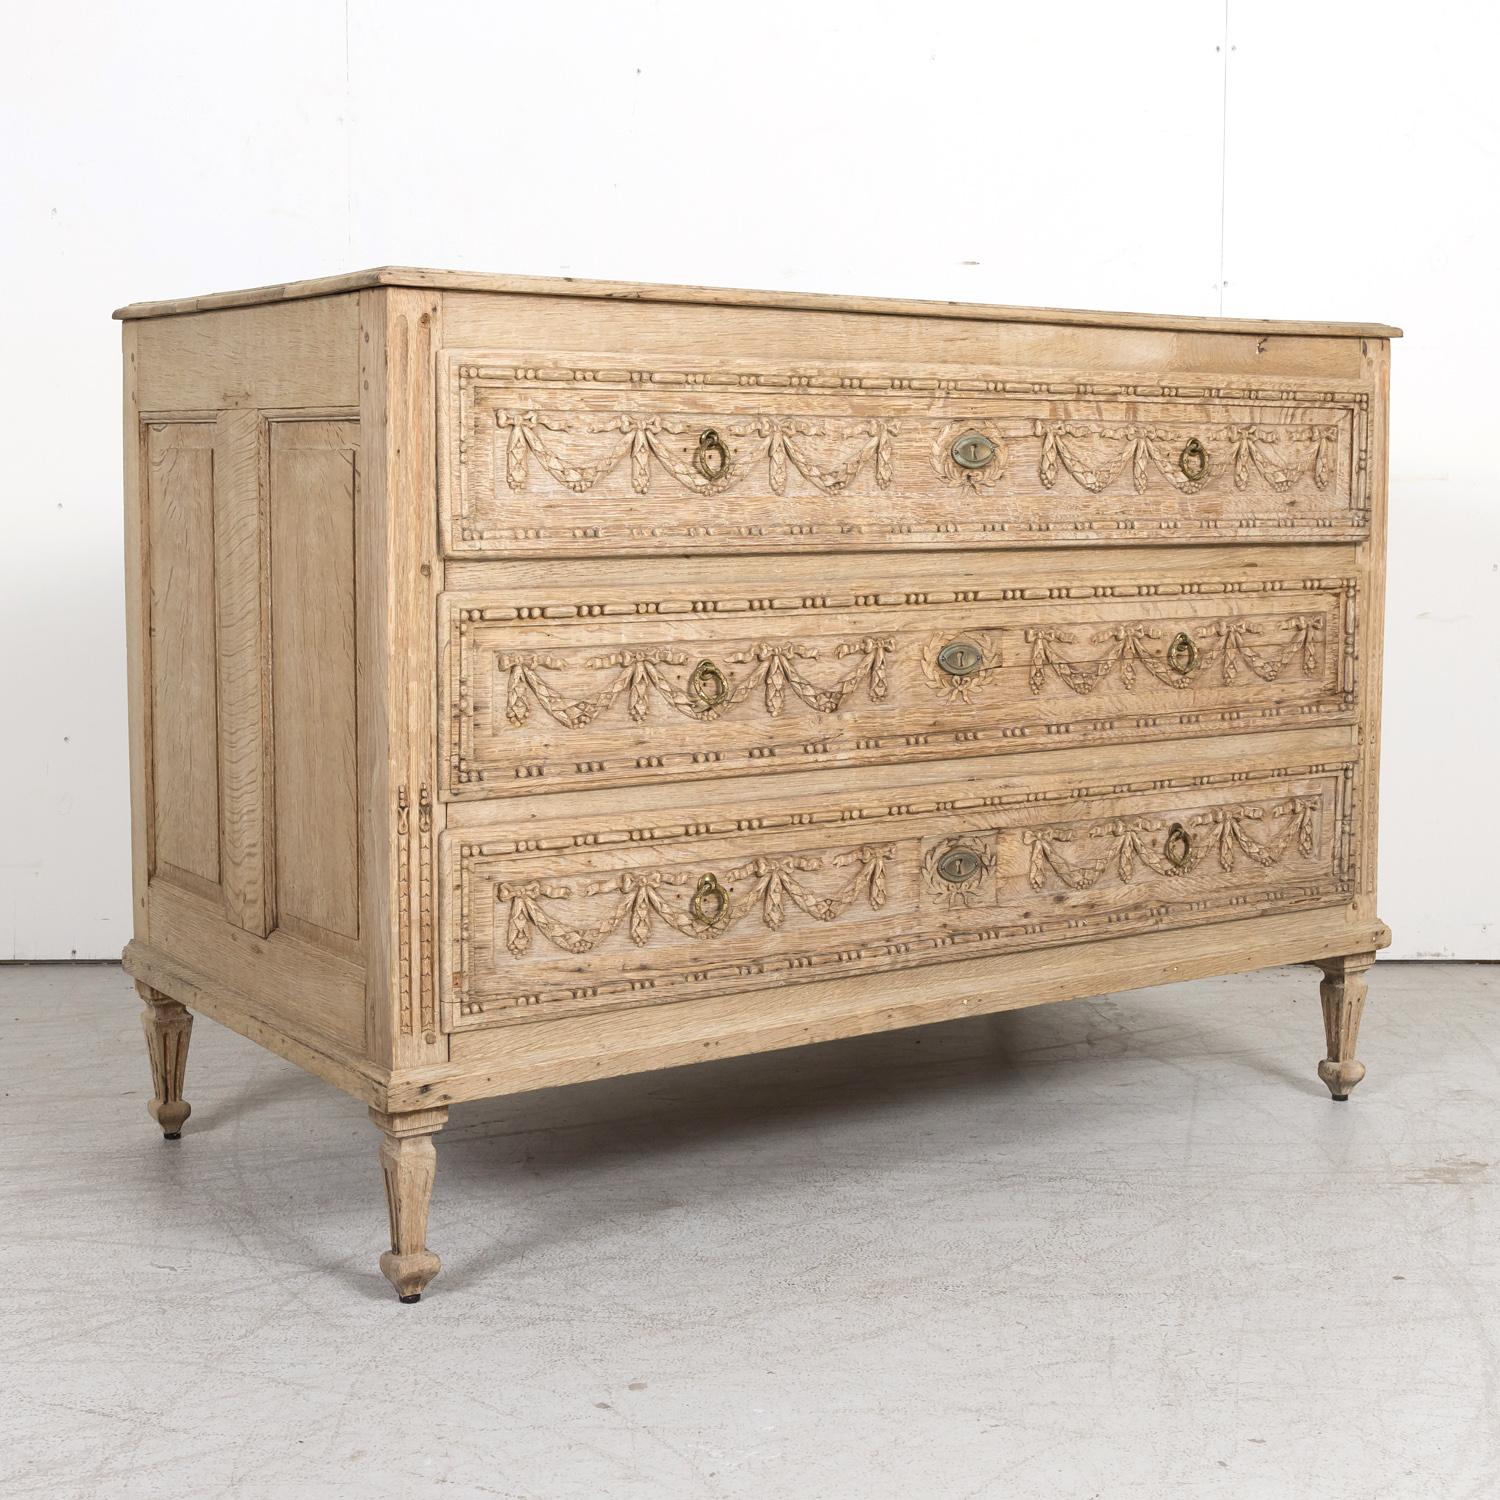 An early 19th century French Louis XVI style carved commode handcrafted of solid oak by talented artisans near Aix-en-Provence in the Provence region of southern France, circa 1810. This exquisite bleached wood commode features a rectangular plank